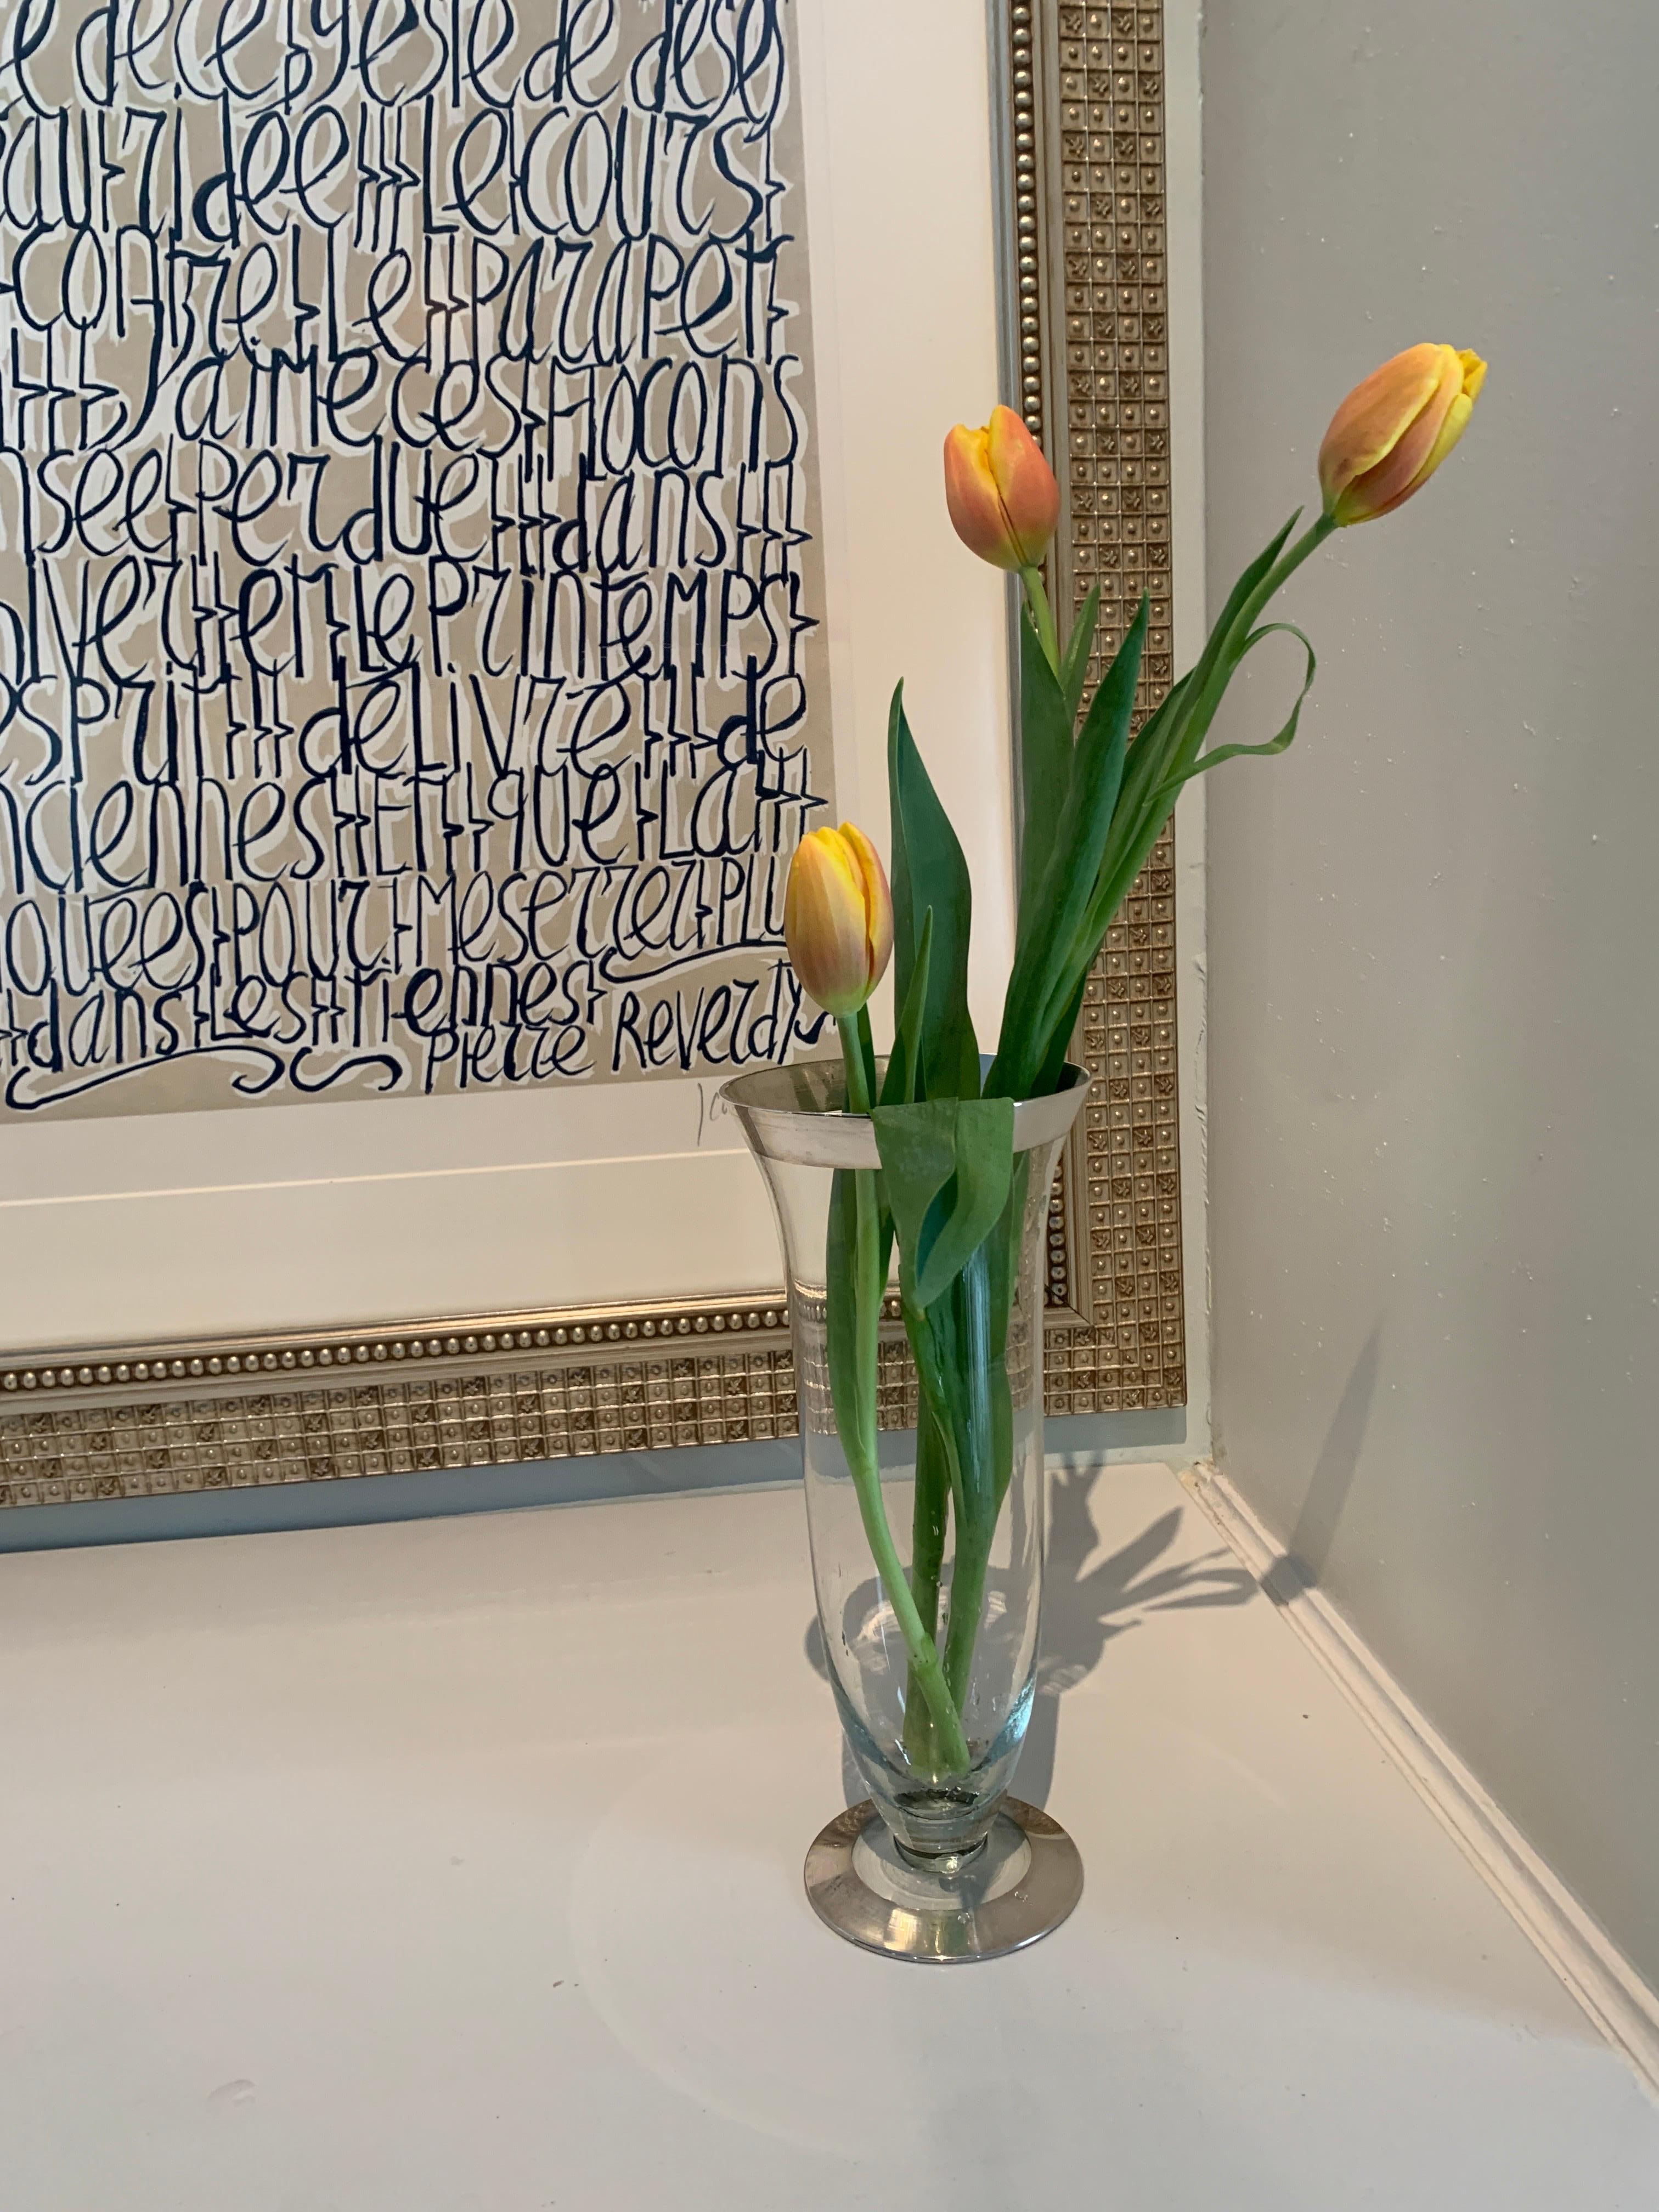 Classic style and simple vase - this Dorothy Thorpe Vase creates a sense of elegance without overpowering it's nearby decorative items an iconic design from an iconic mid century designer.

A great wedding or housewarming gift. The real silver